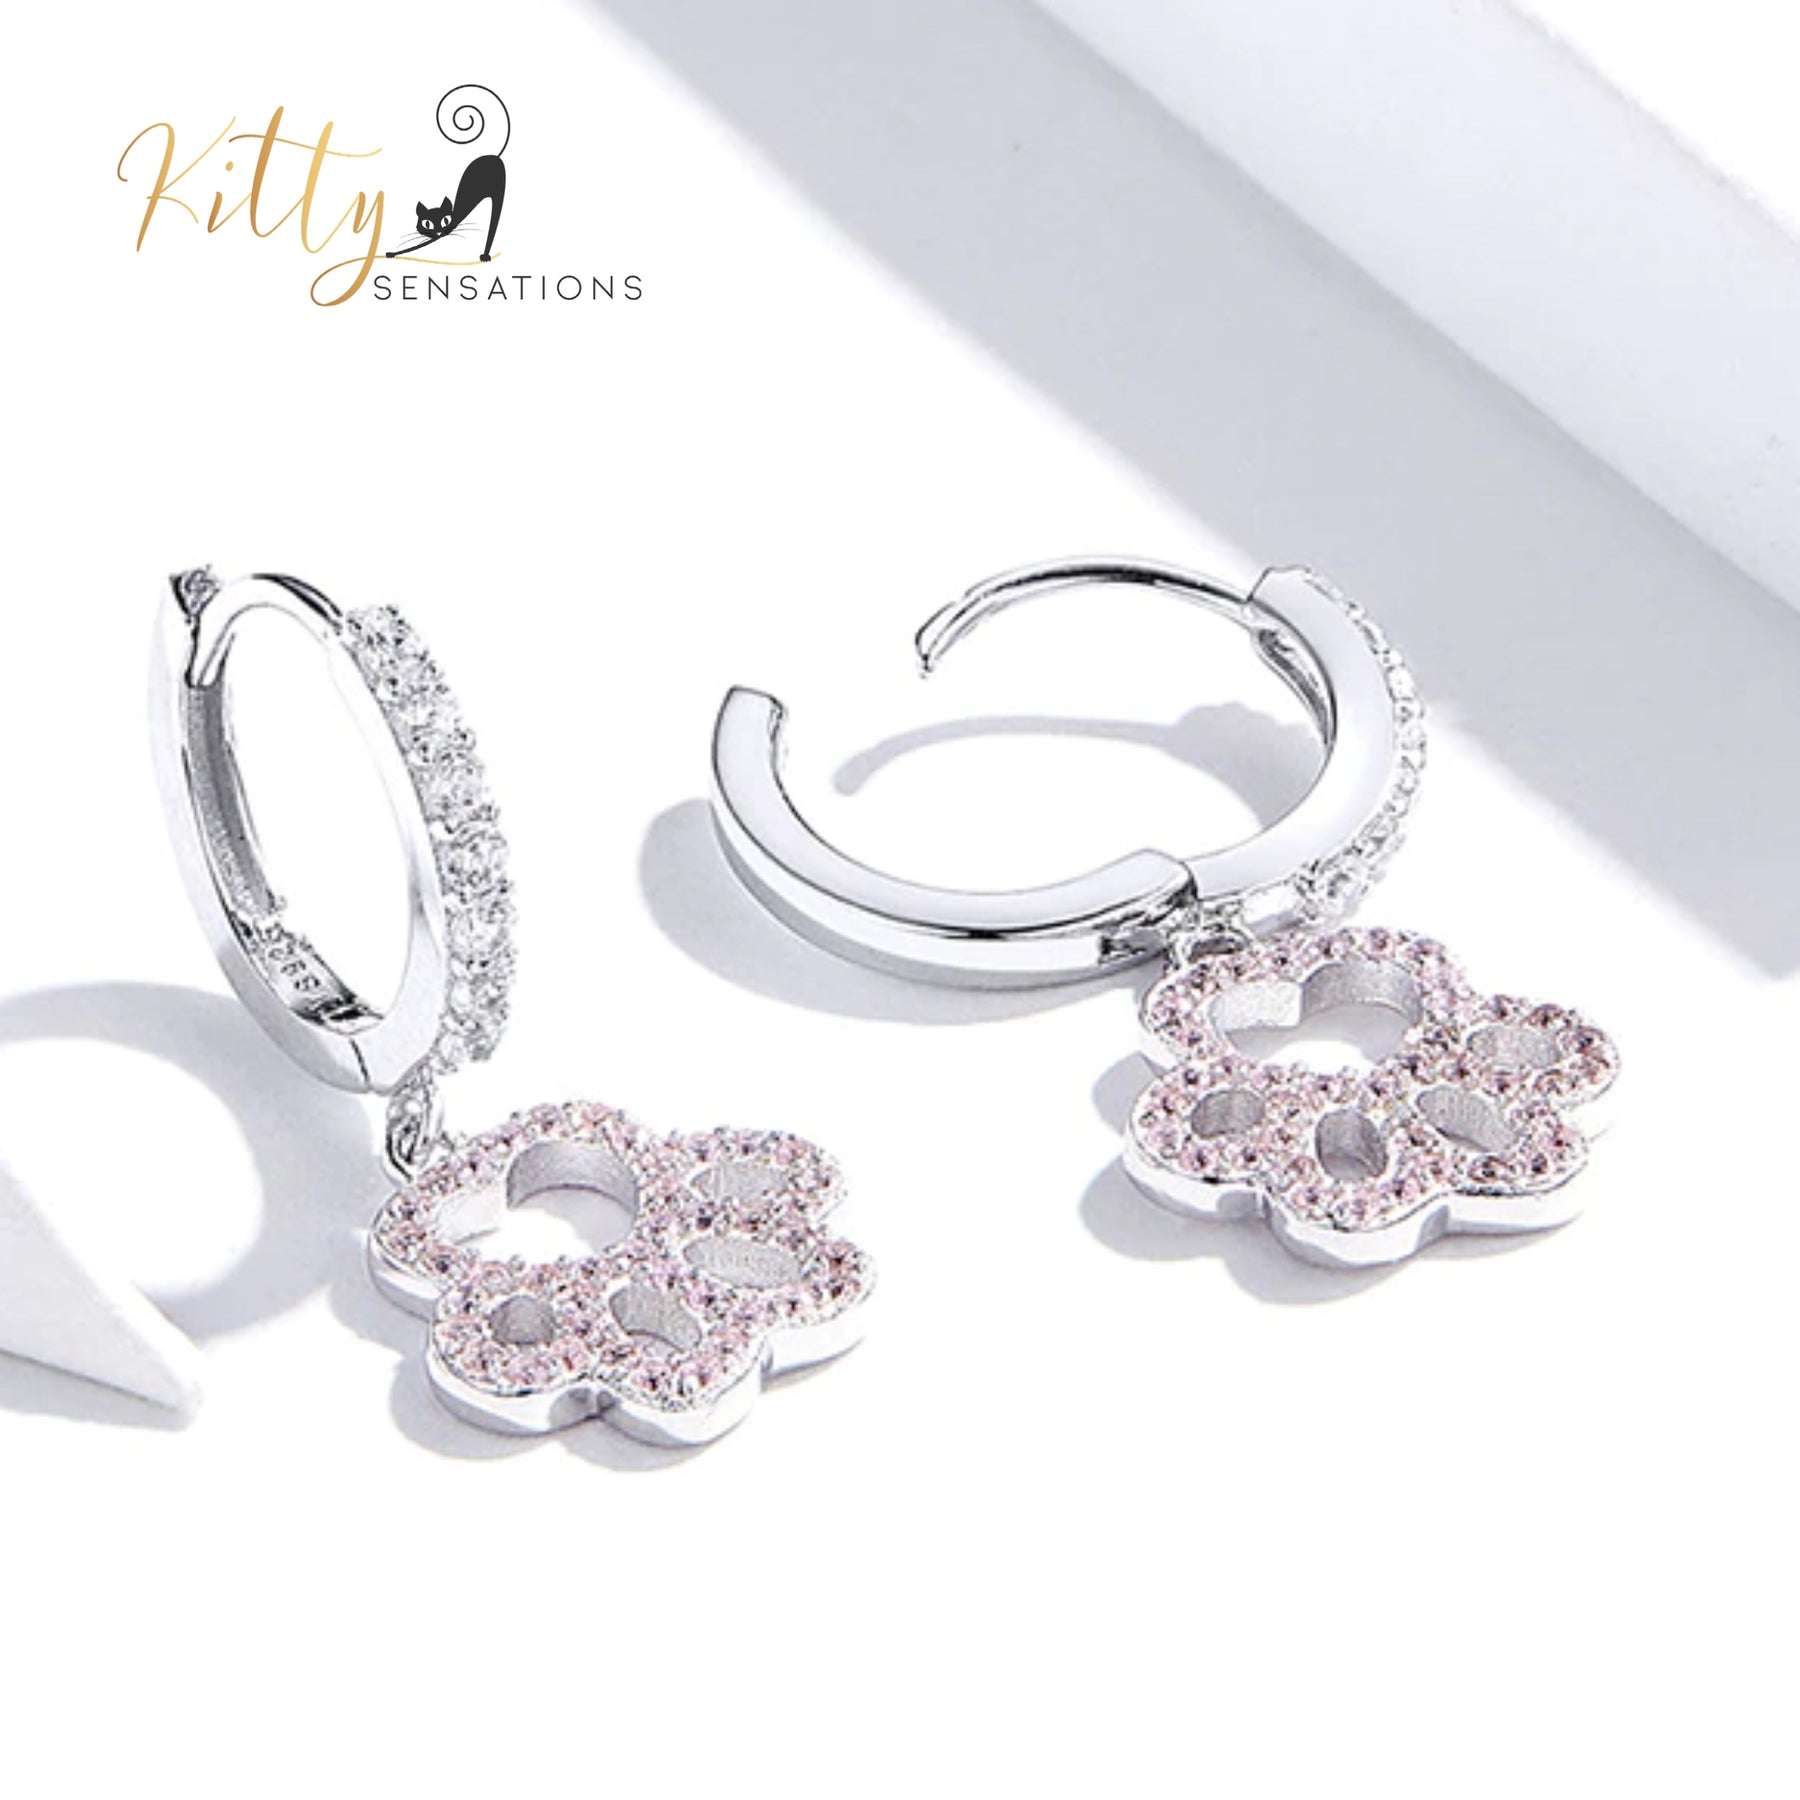 Delicate Pink and Clear Zircon Dangling Paw Cat Hoop Earrings in Solid 925 Sterling Silver (Platinum Plated)